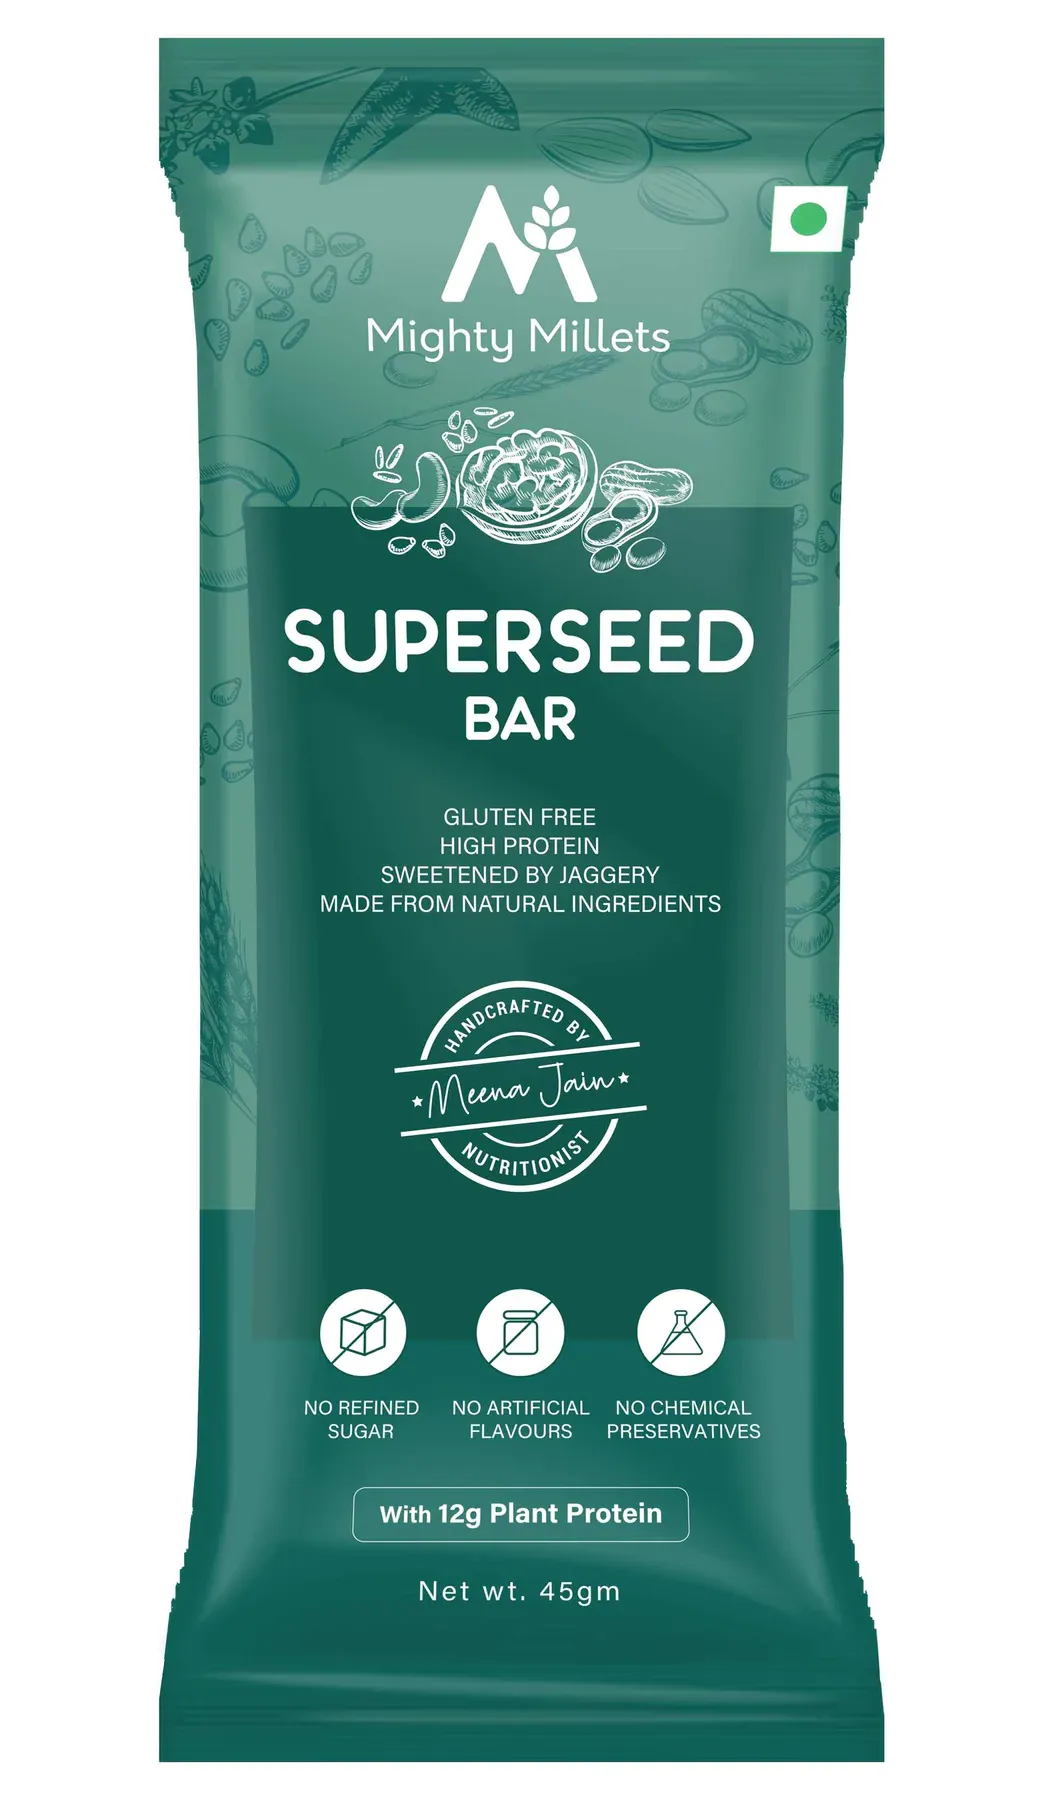 Mighty Millets SuperSeed Bars Image